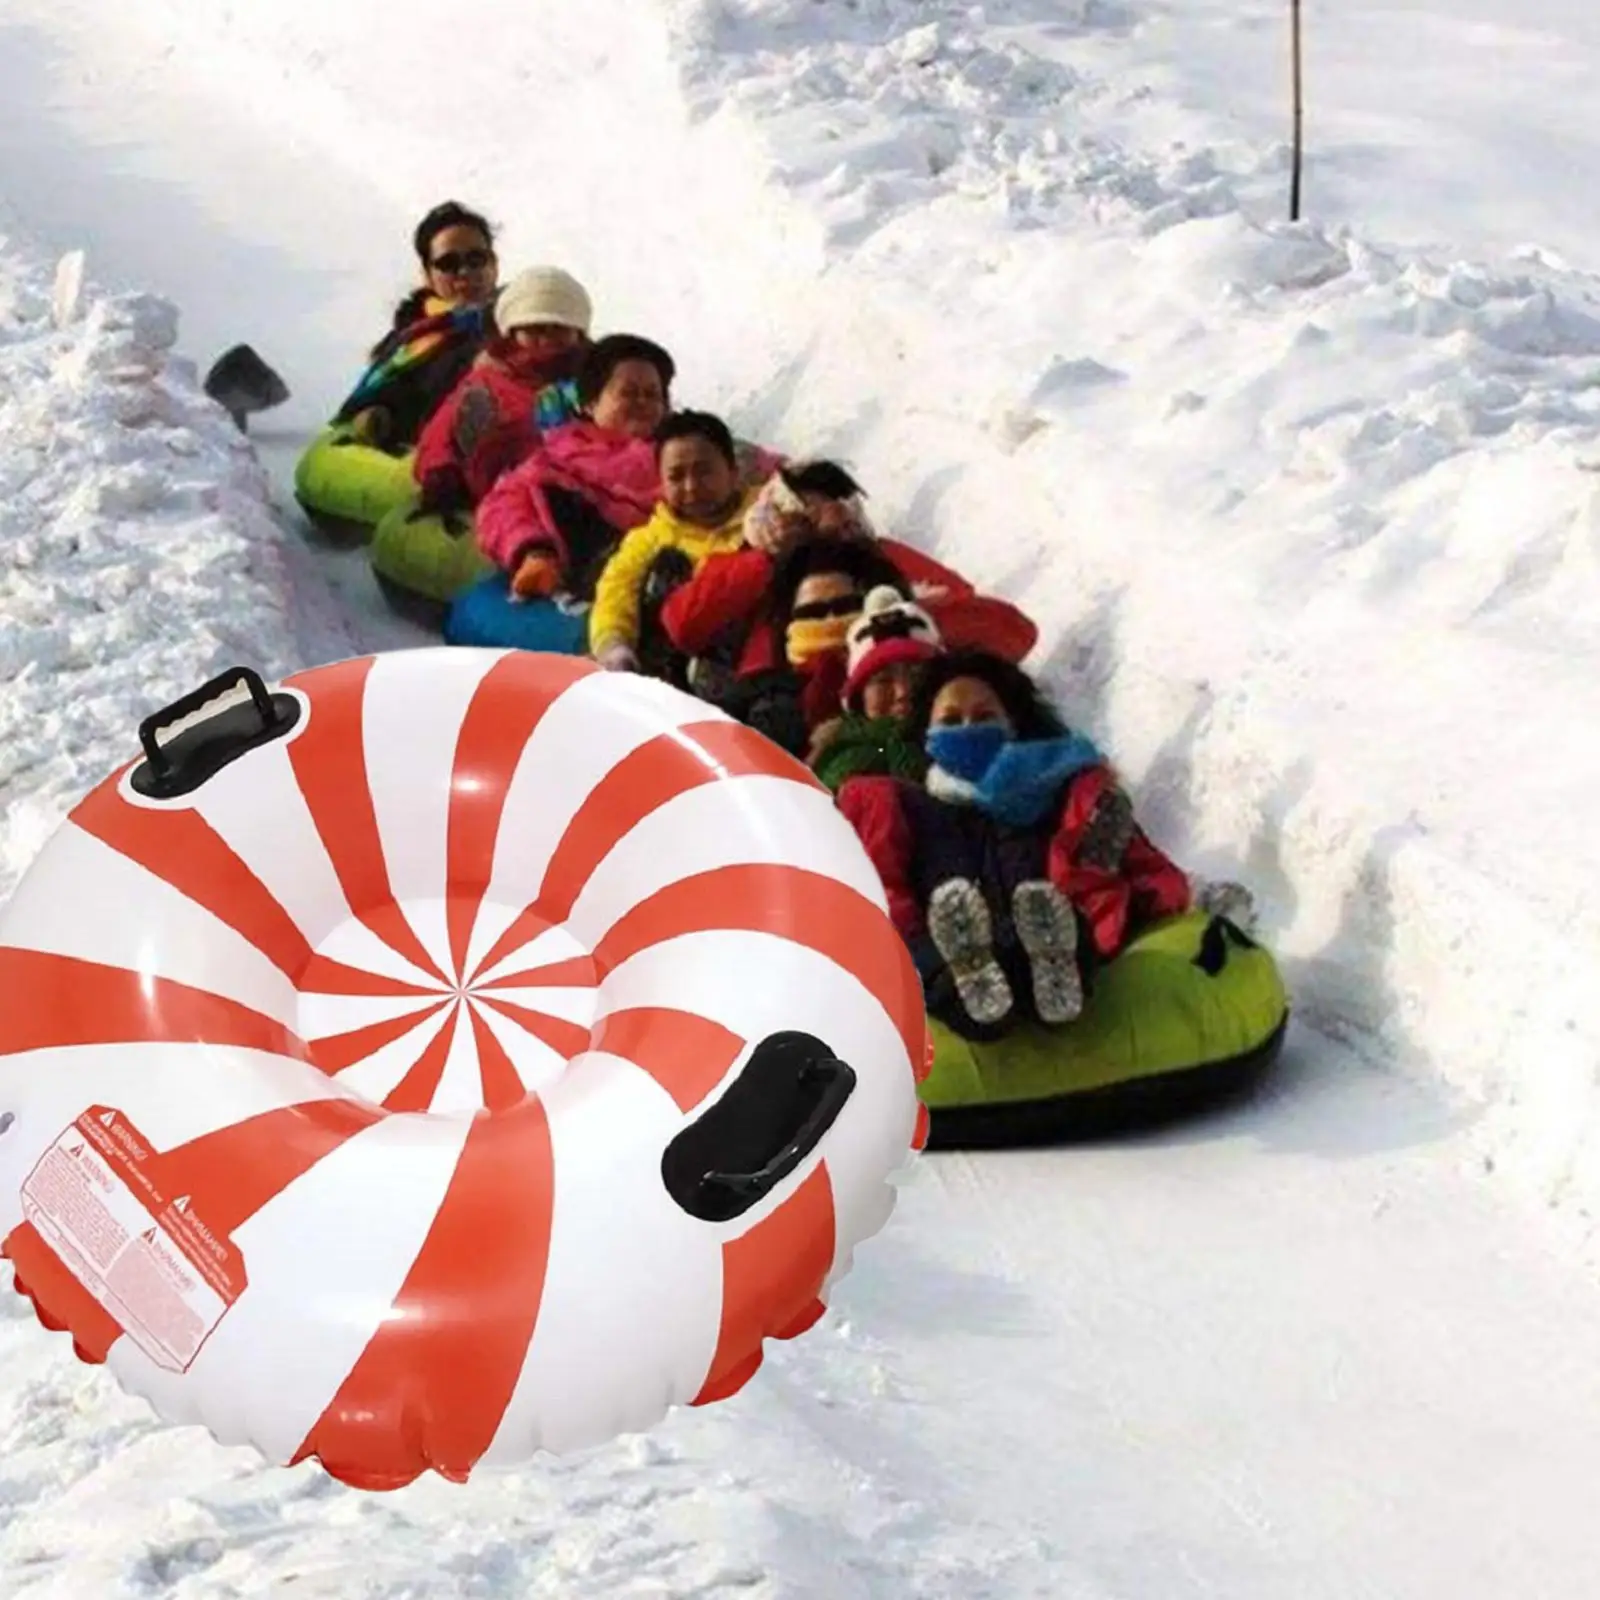 Floated Ski Circle Winter Inflatable Snow Tube with Handle Skiing Accessory